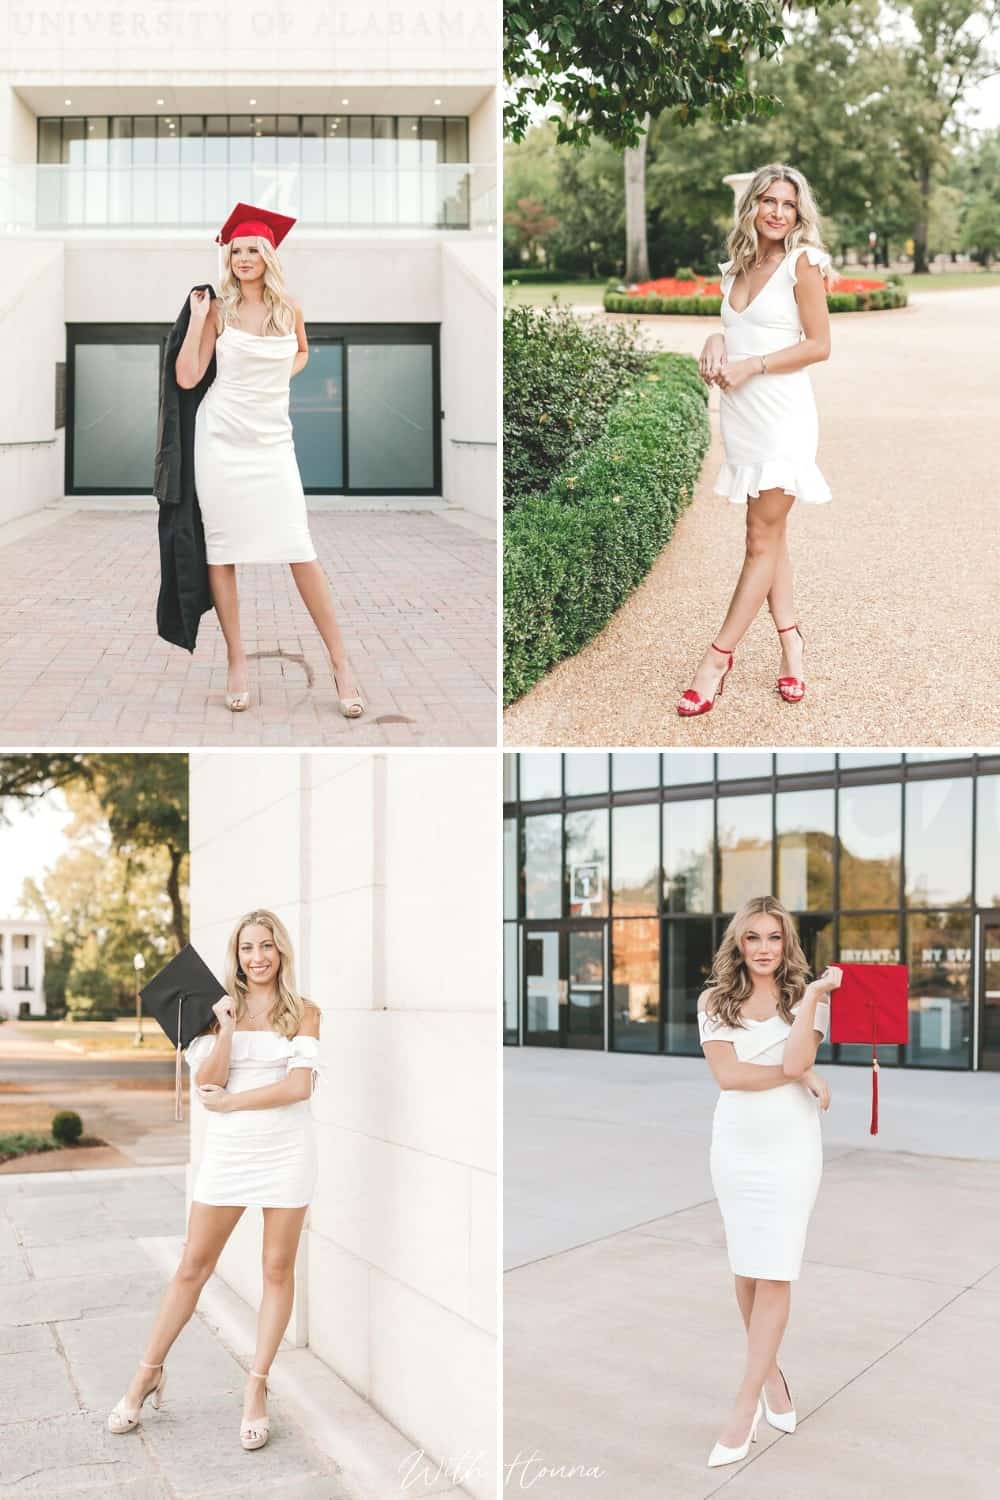 30 Insanely Cute White Graduation Outfit Ideas You Have to Get for Your Big  Day - With Houna